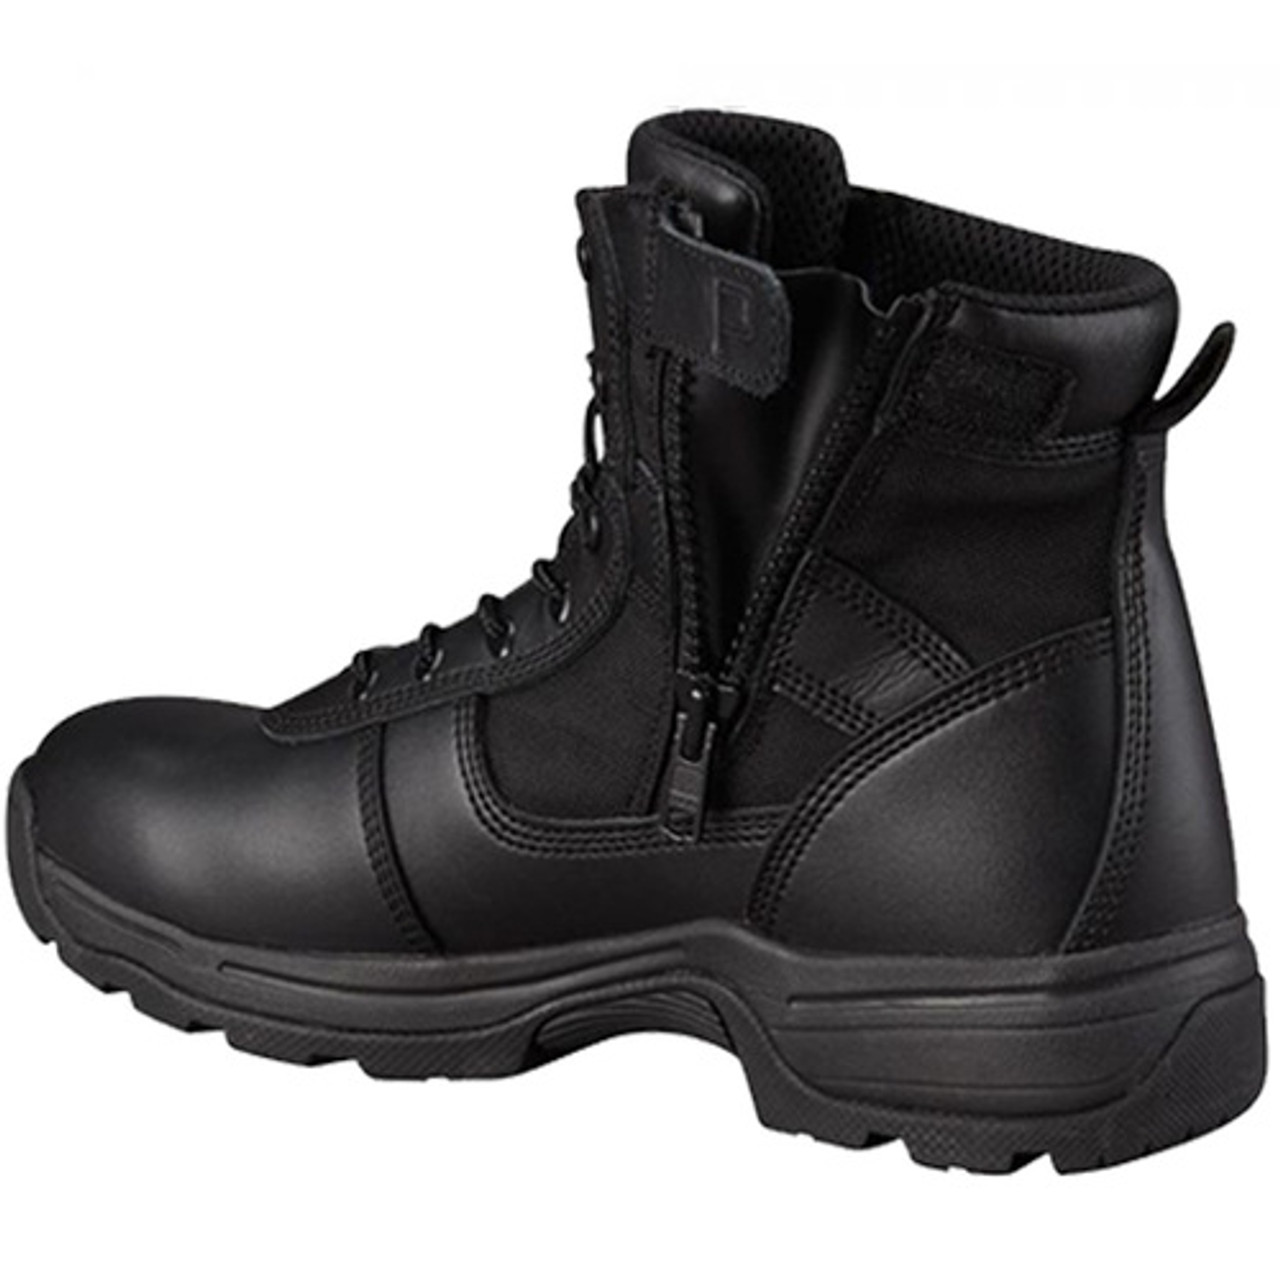 Propper Series 100® F4506 6 inch Side Zip Tactical Boot with zipper guard,  Men's/Women's, Uniform/Casual, Regular and Wide Width, Oil and Slip  Resistant, Triple Stitch Boot, Black